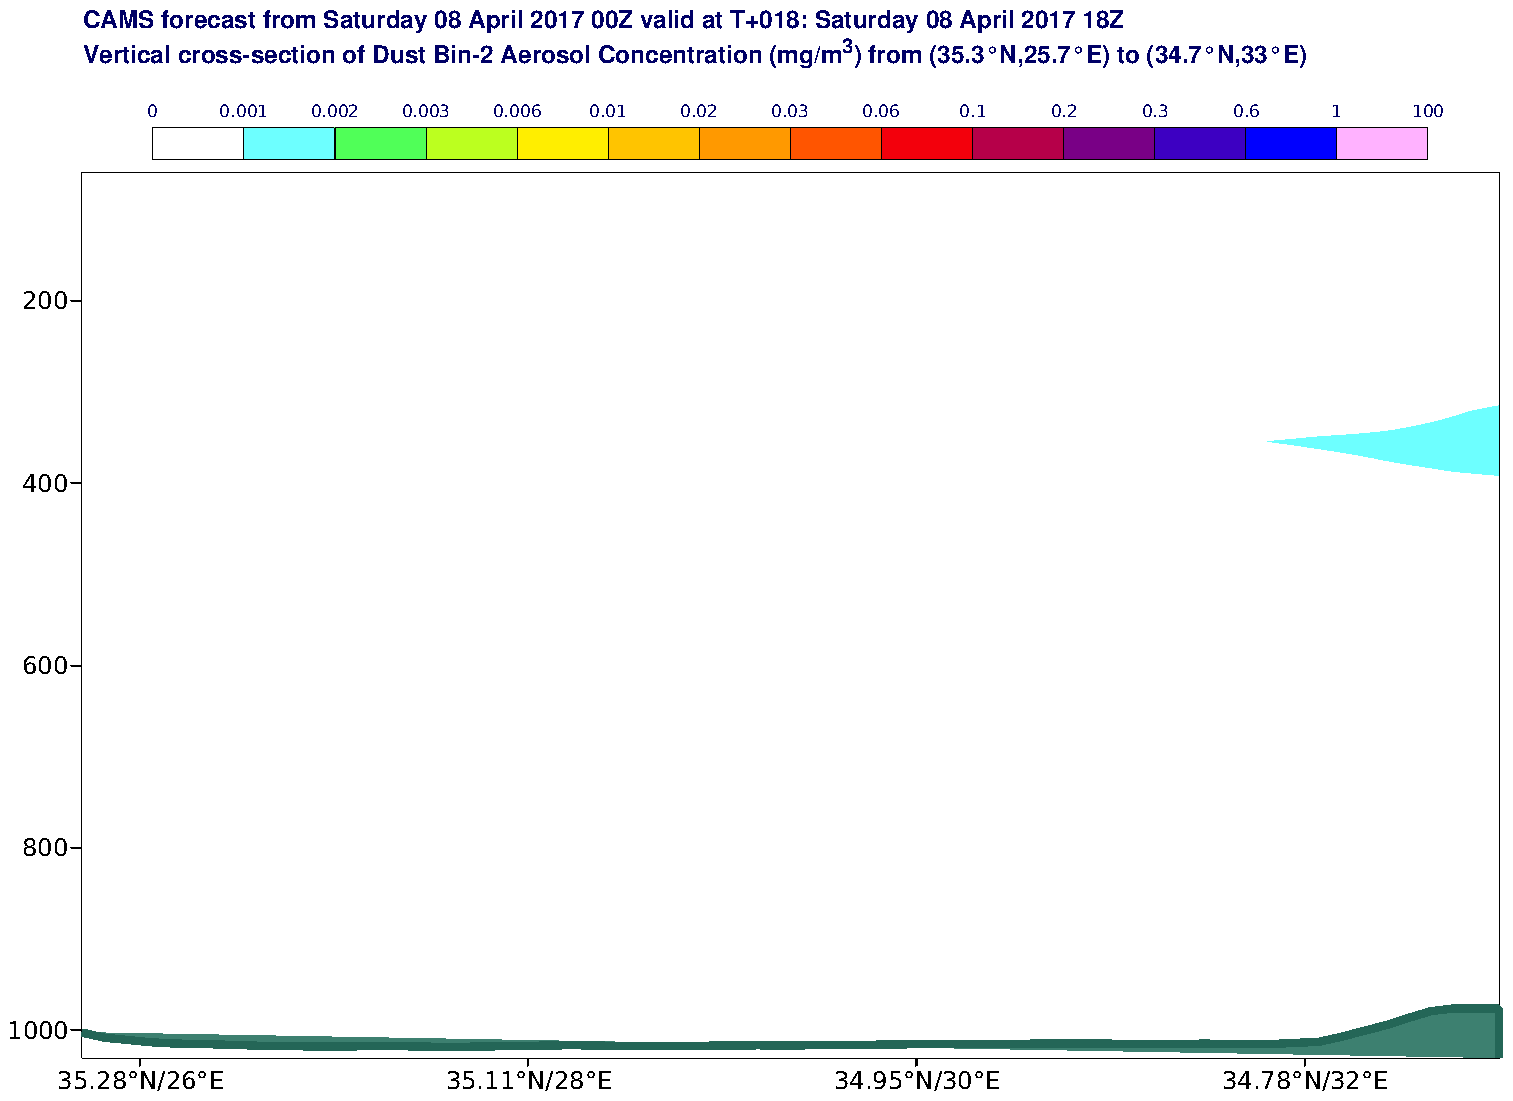 Vertical cross-section of Dust Bin-2 Aerosol Concentration (mg/m3) valid at T18 - 2017-04-08 18:00